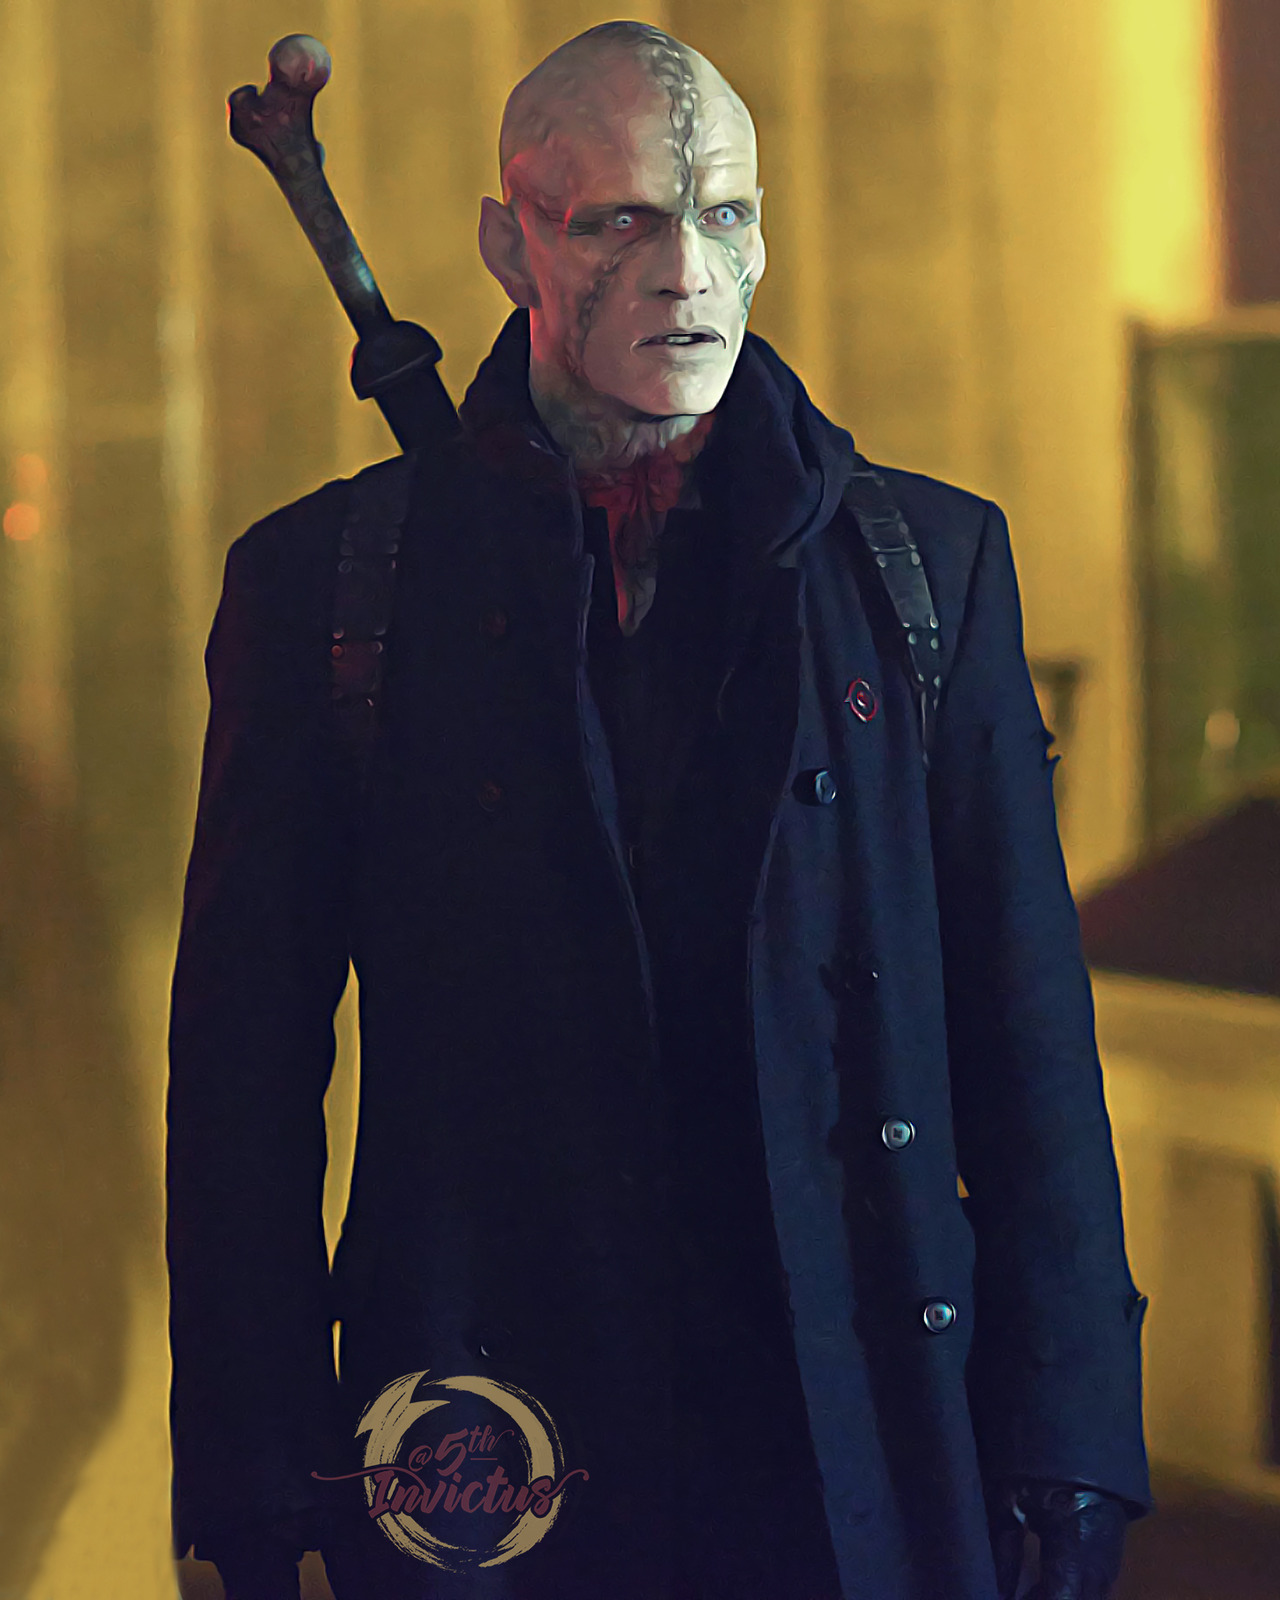 The 5th Invictus - Mr. Quinlan, The Strain, Season 4 An extra today...